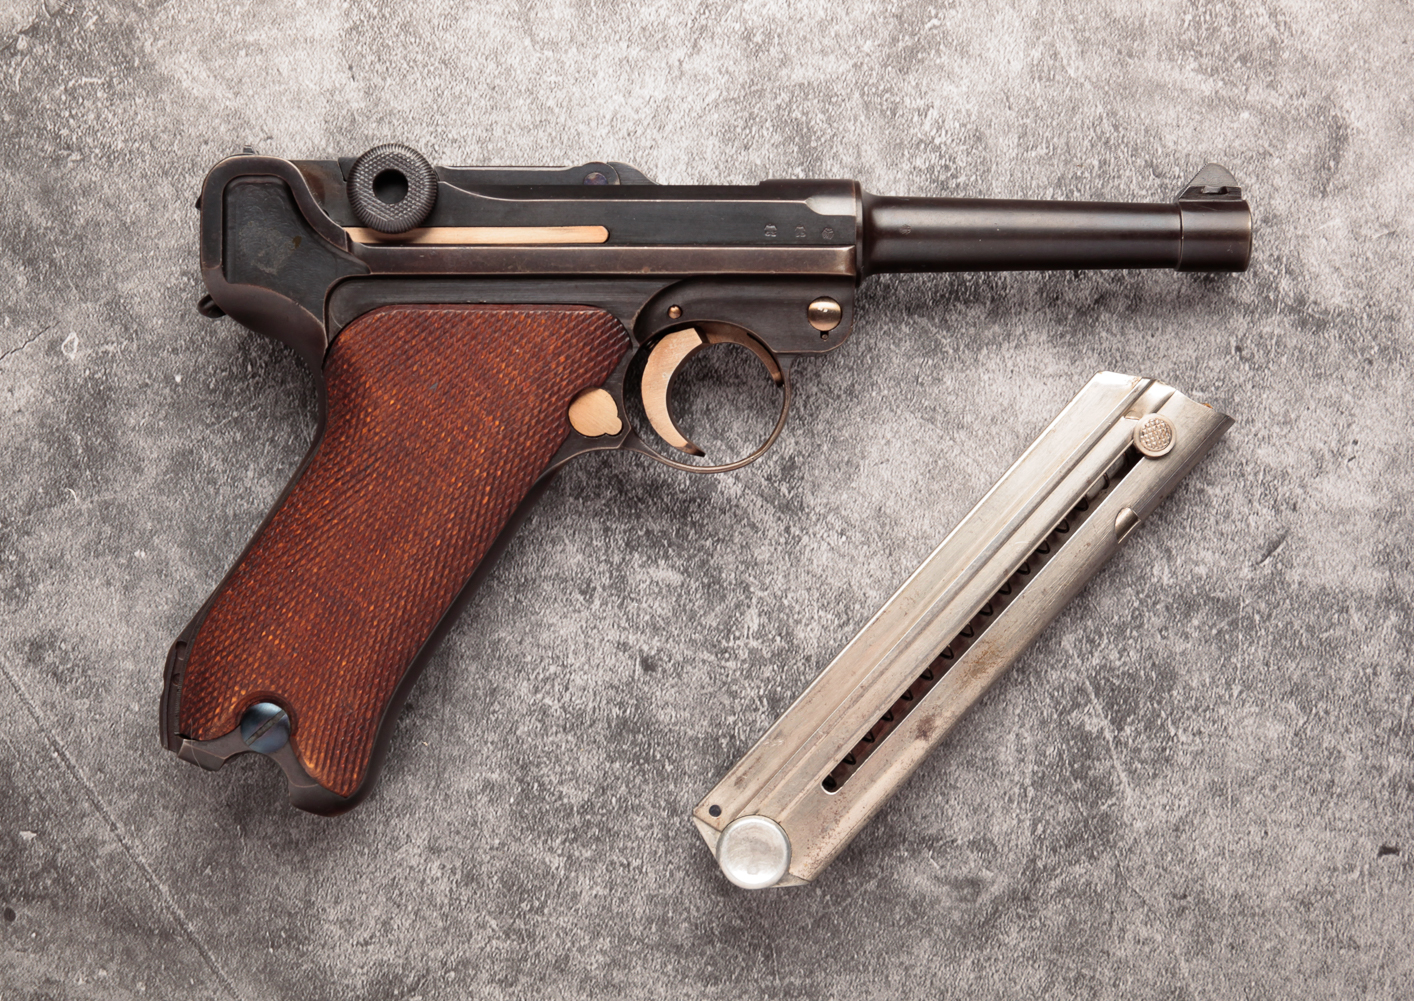 S/42 CODE "G" DATE WW2 9MM LUGER